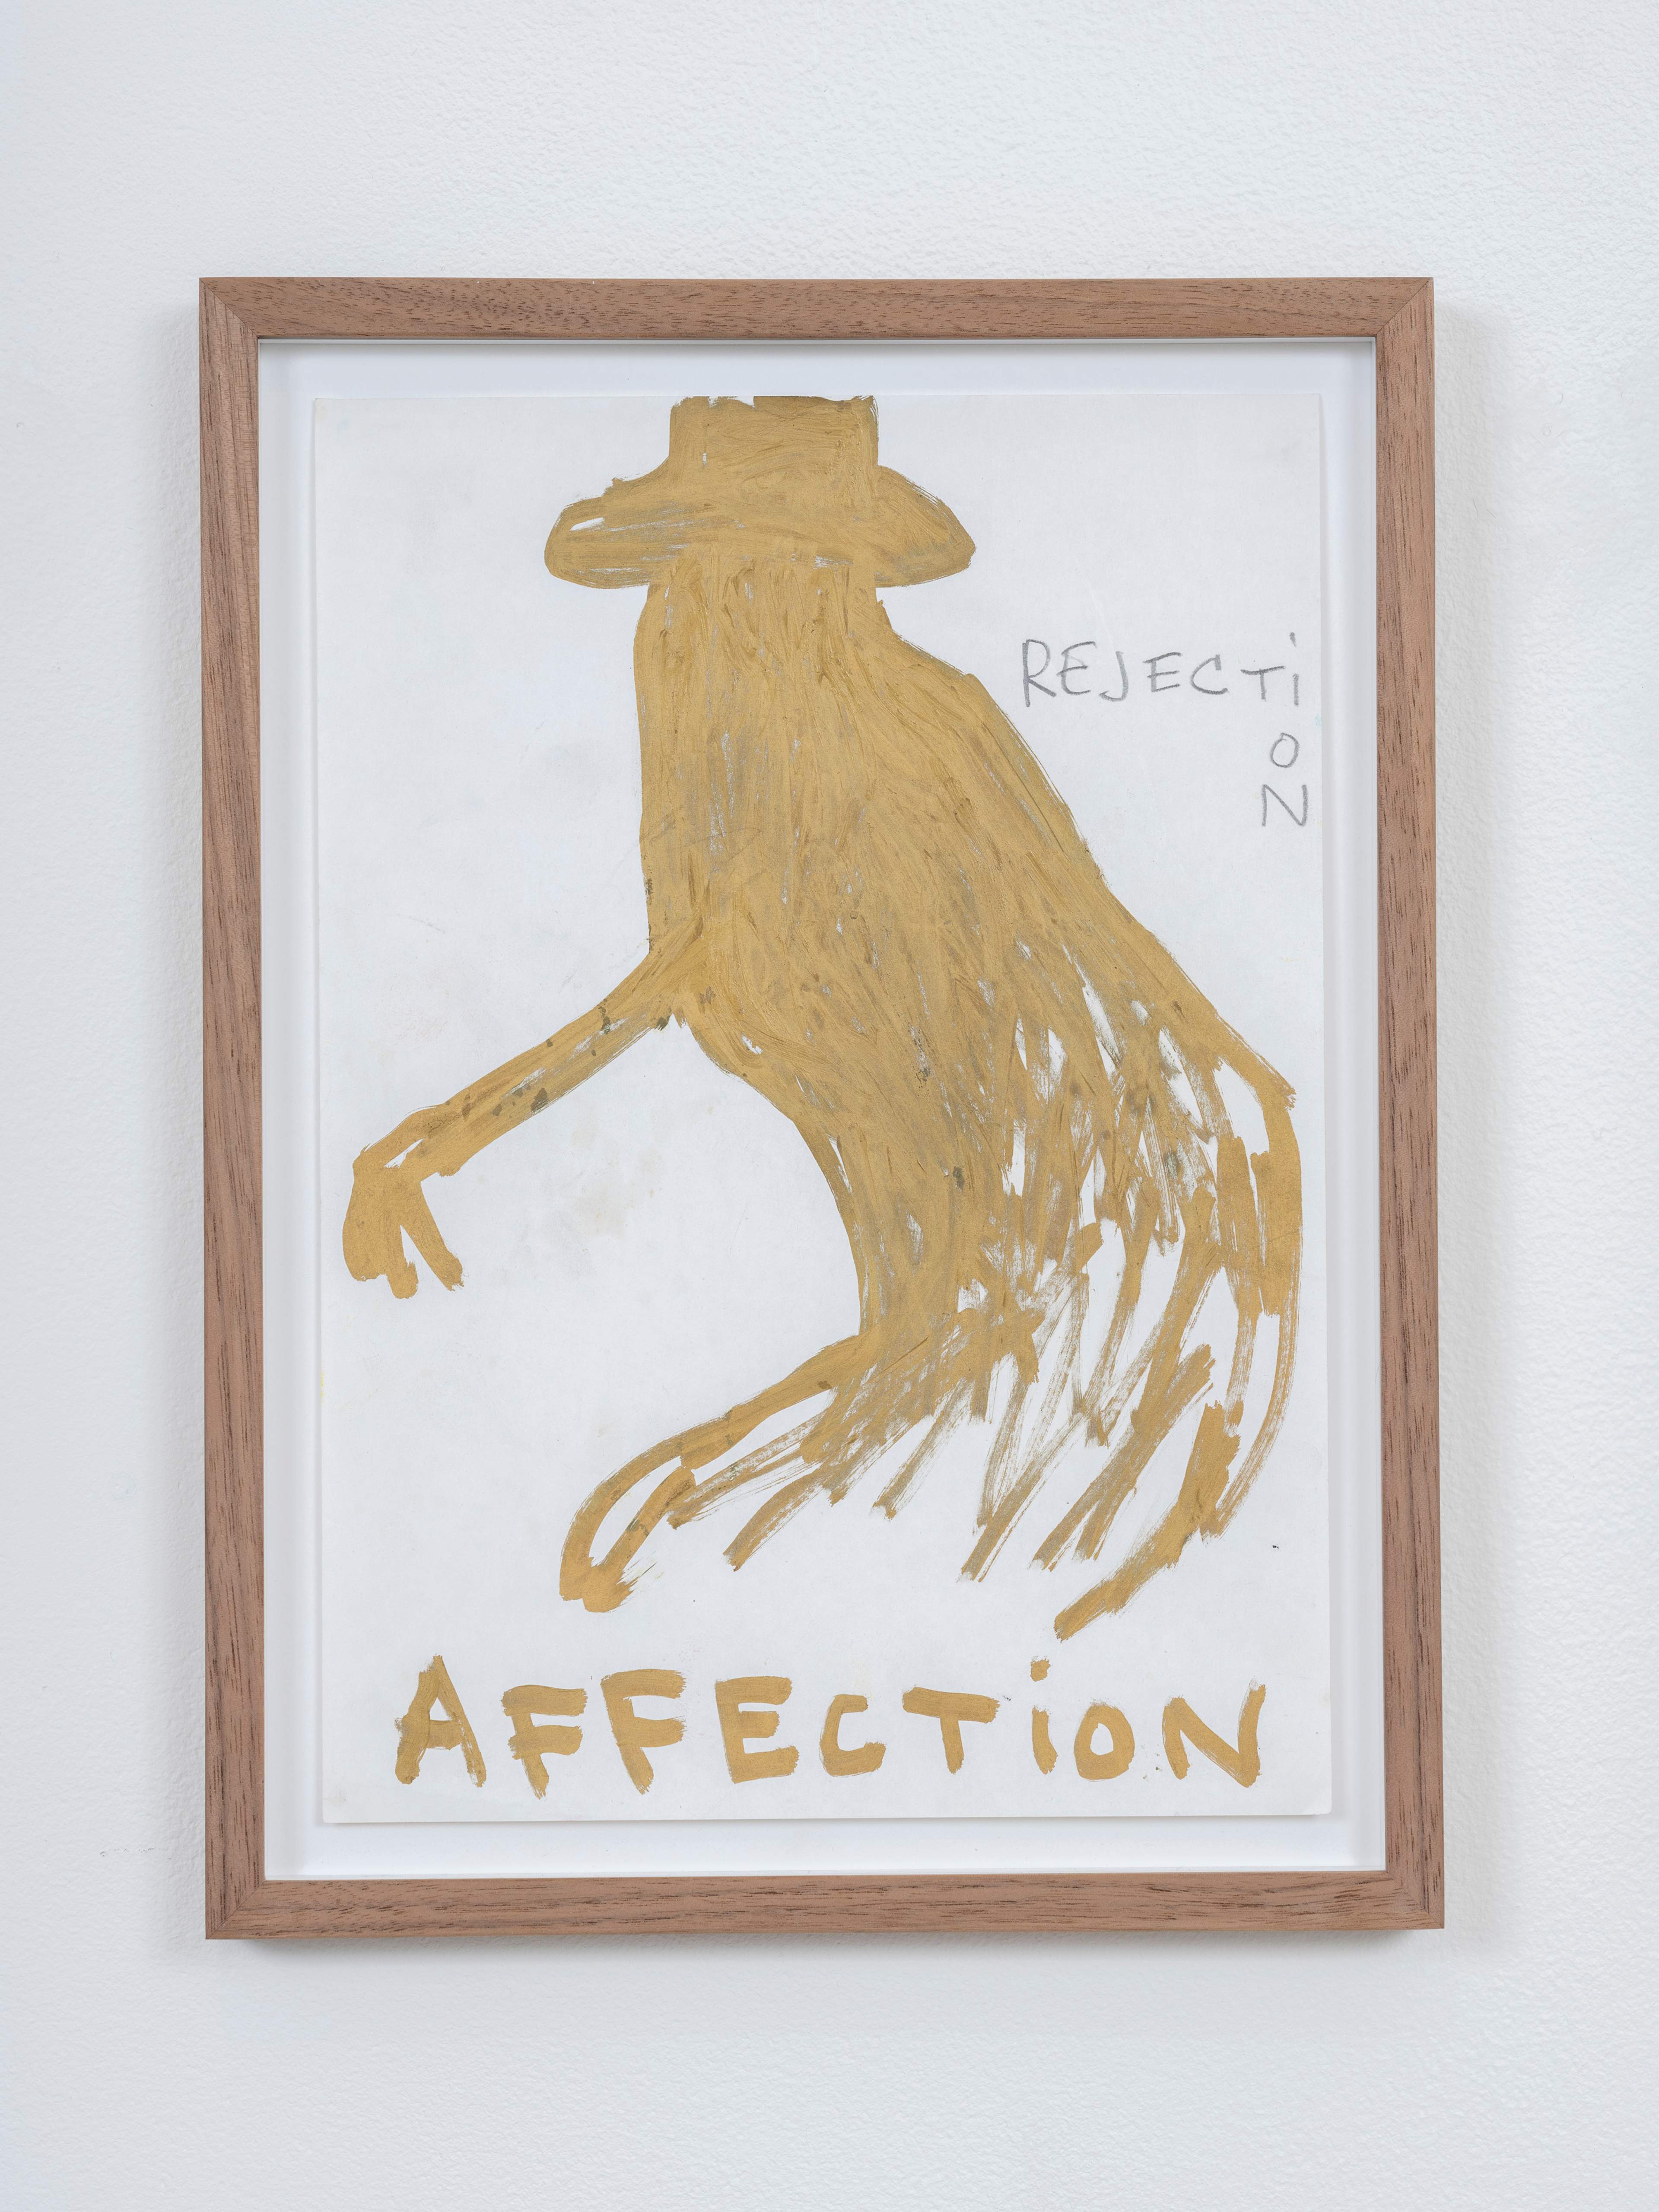 Sebastian Helling, Rejection, 2018, mixed media on paper, 29,7x21 cm